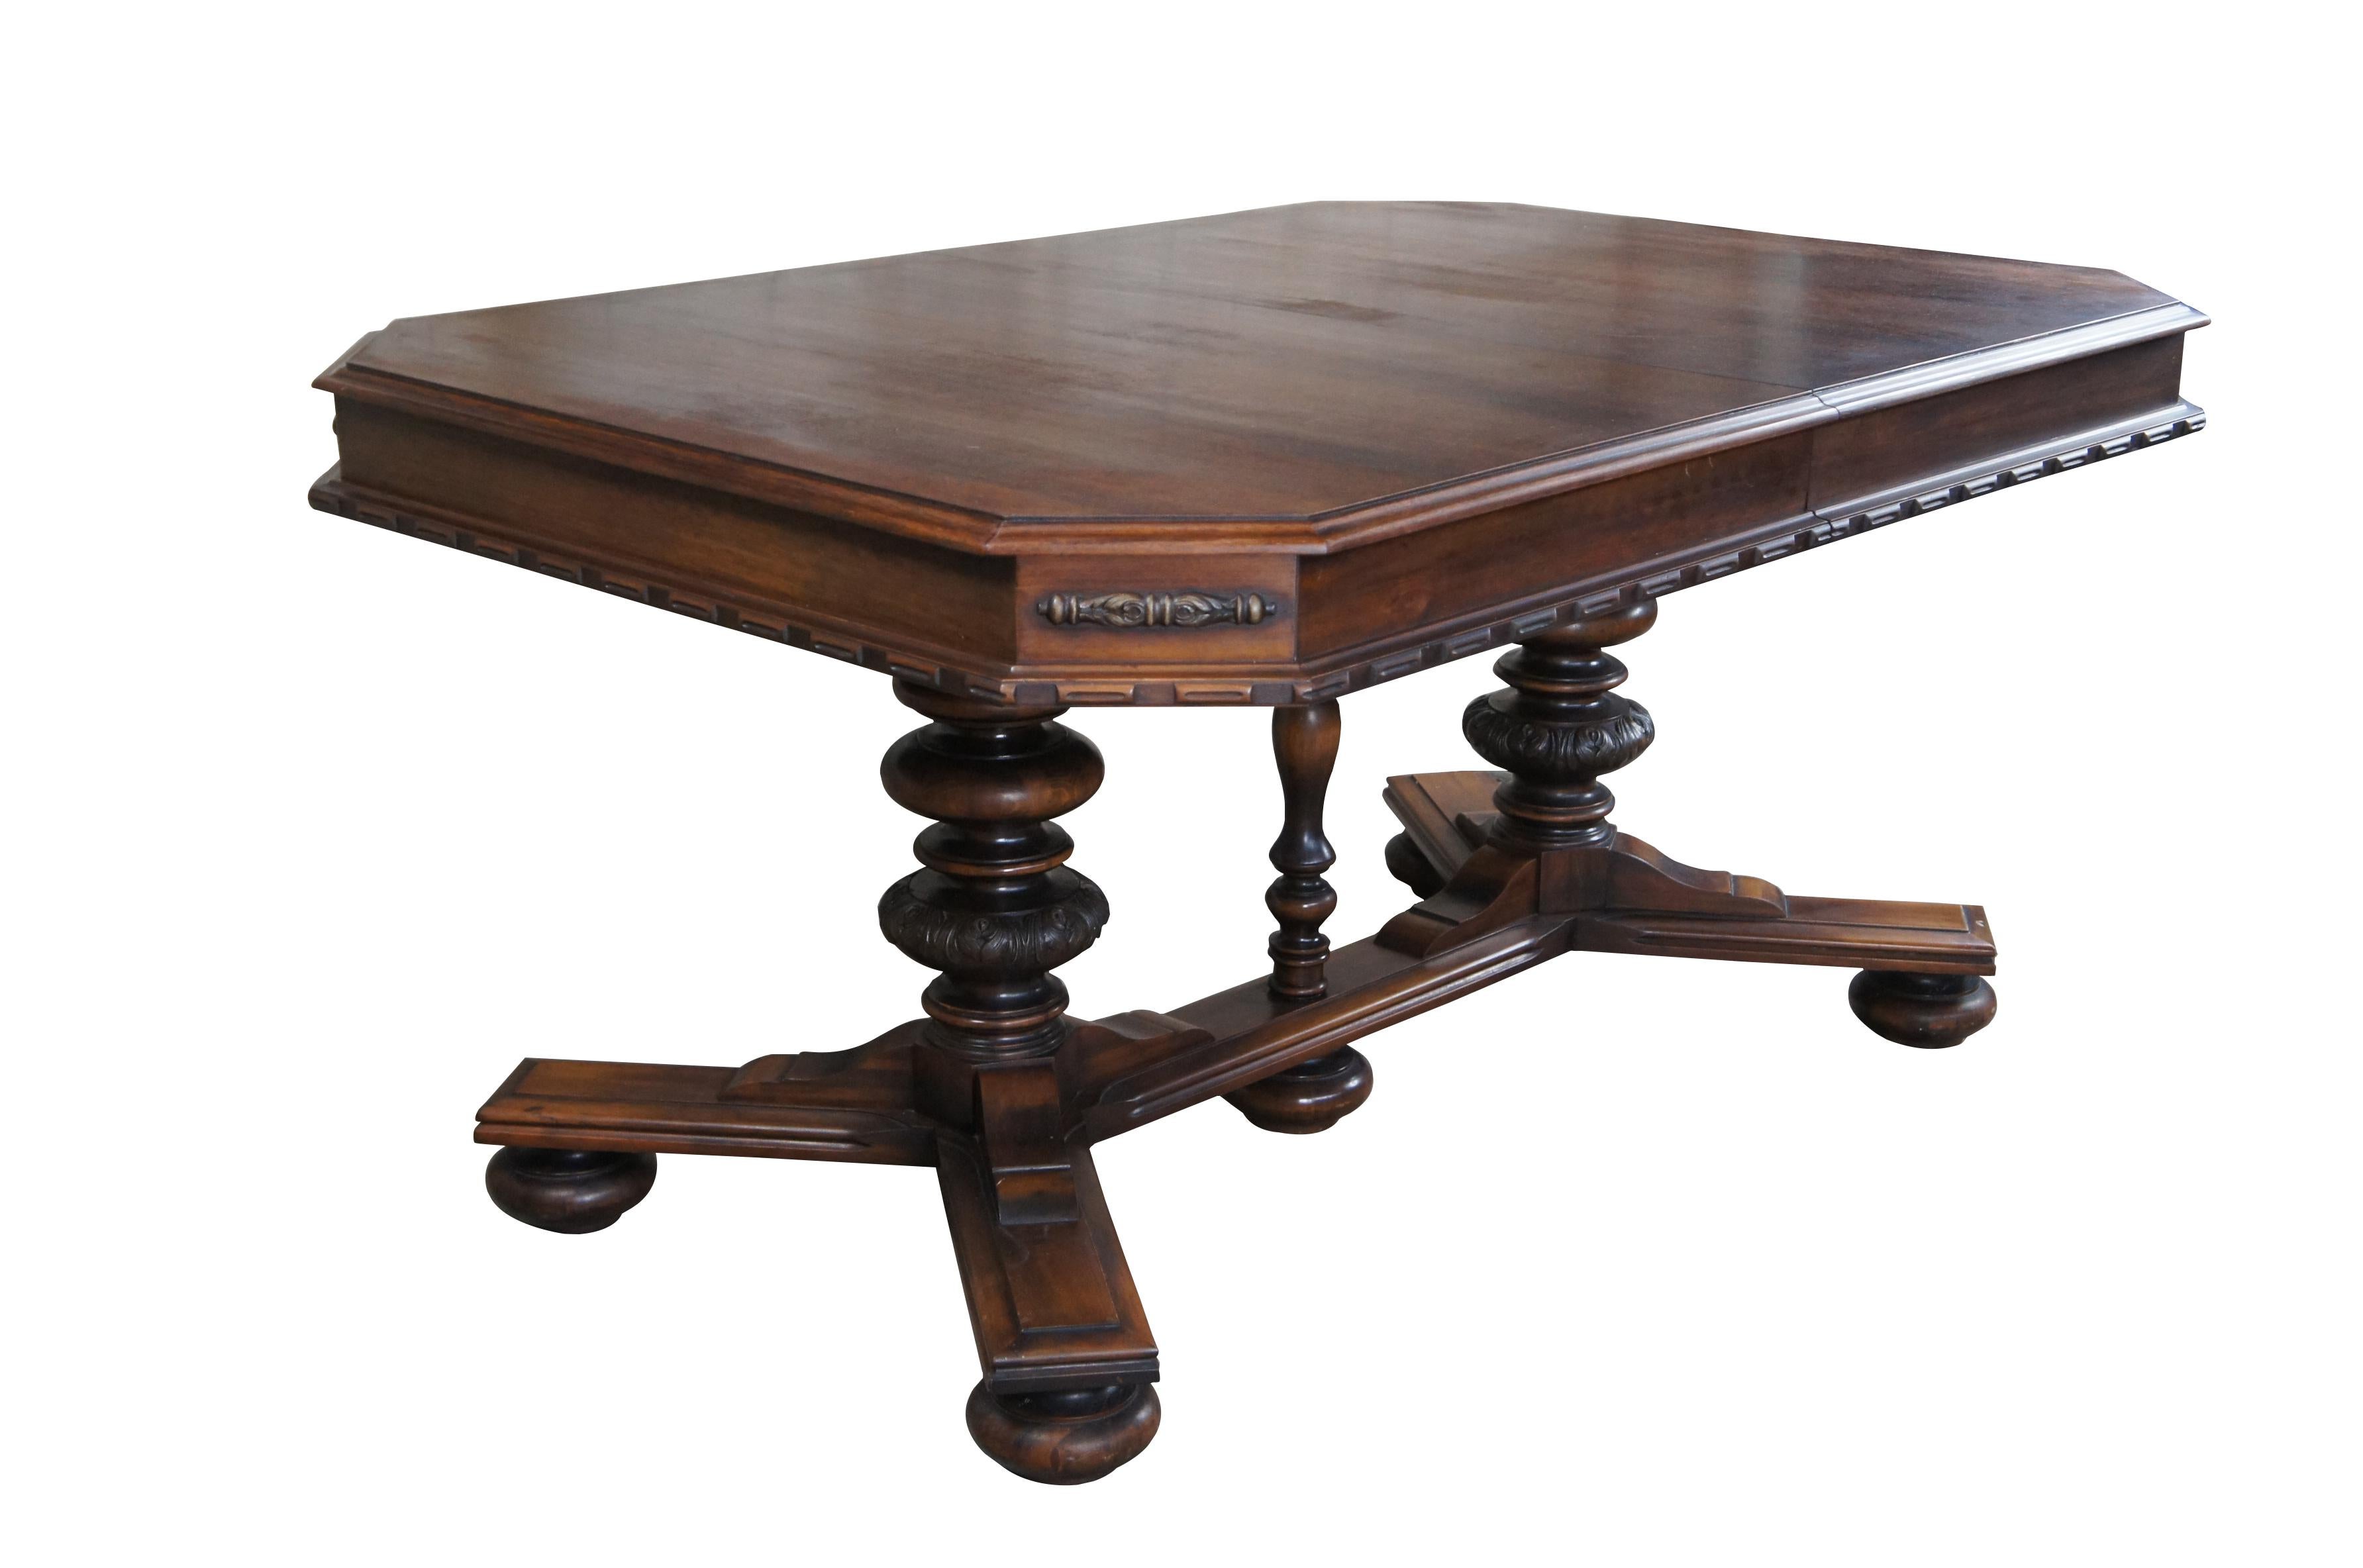 Antique Life Time Furniture Jacobean style dining table, circa early 20th century.  Made from walnut with cut corners and a notched apron over a turned and carved trestle base supported by robust bun feet.

In the late 19th century and early 20th